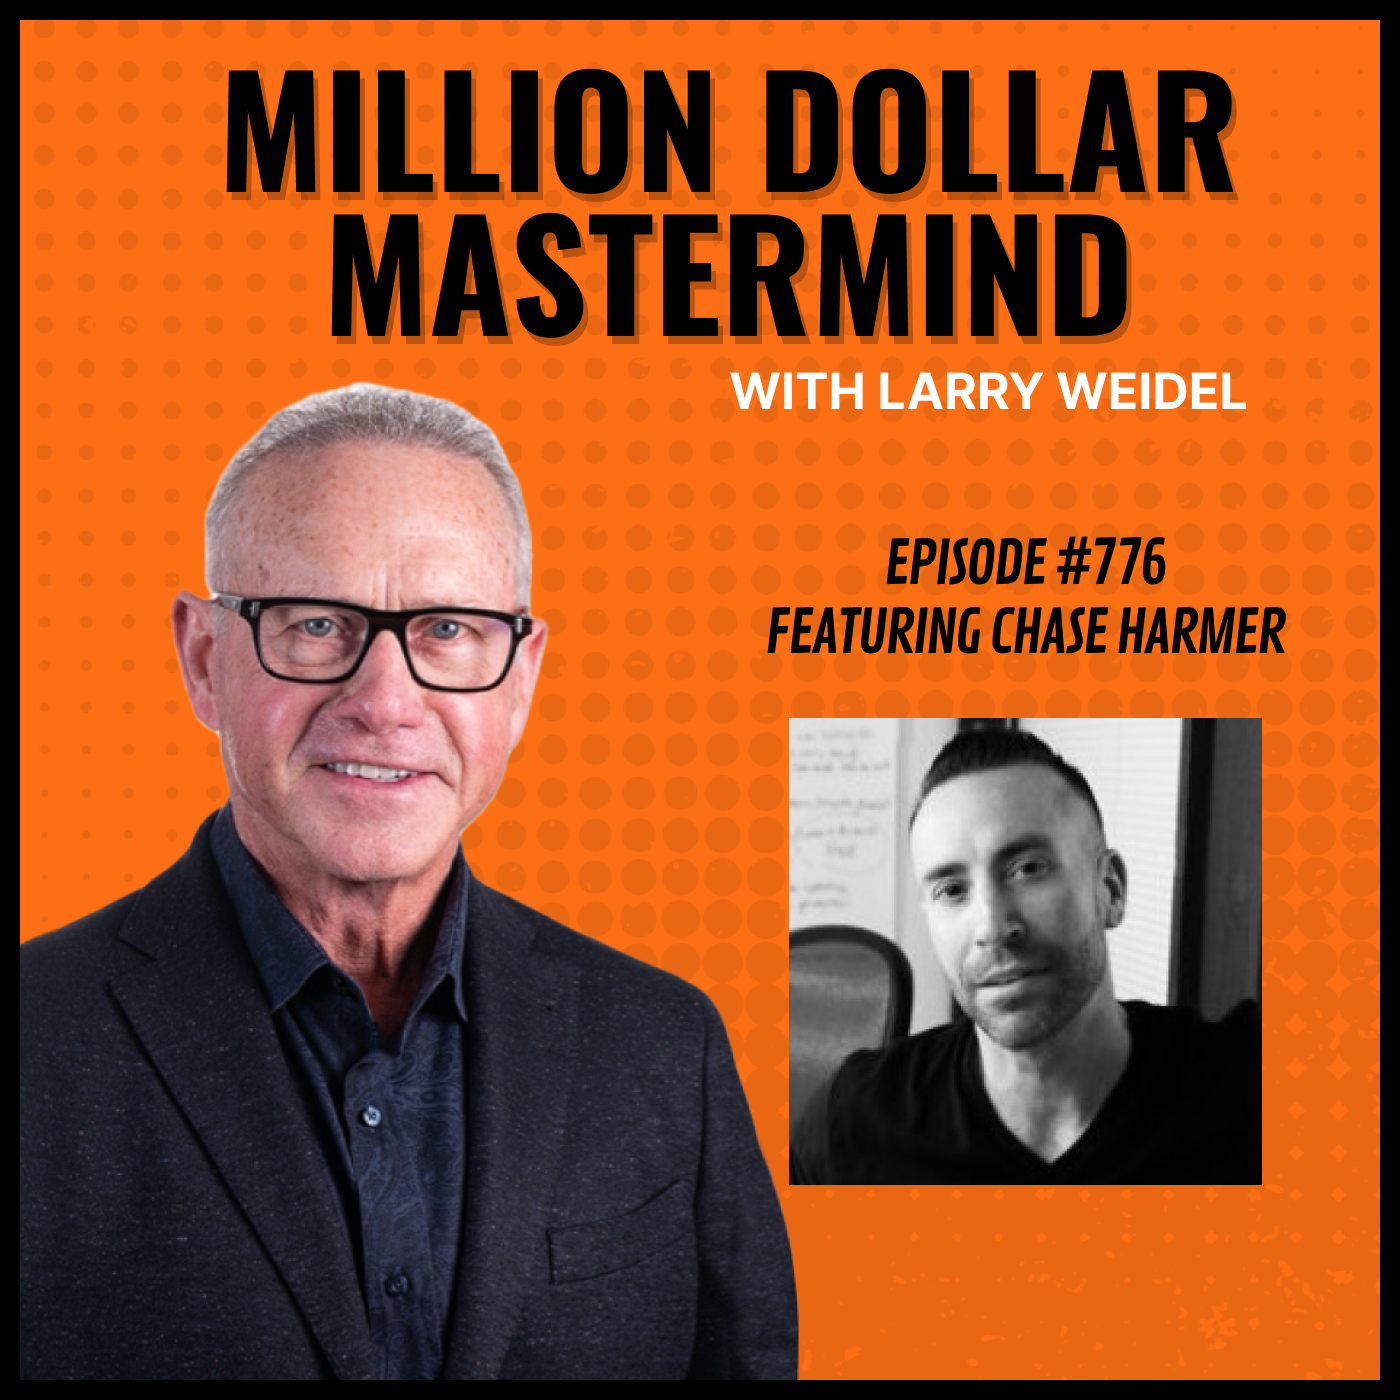 Episode #776 - The Teach-and-Train Approach For Winning In Business with Chase Harmer